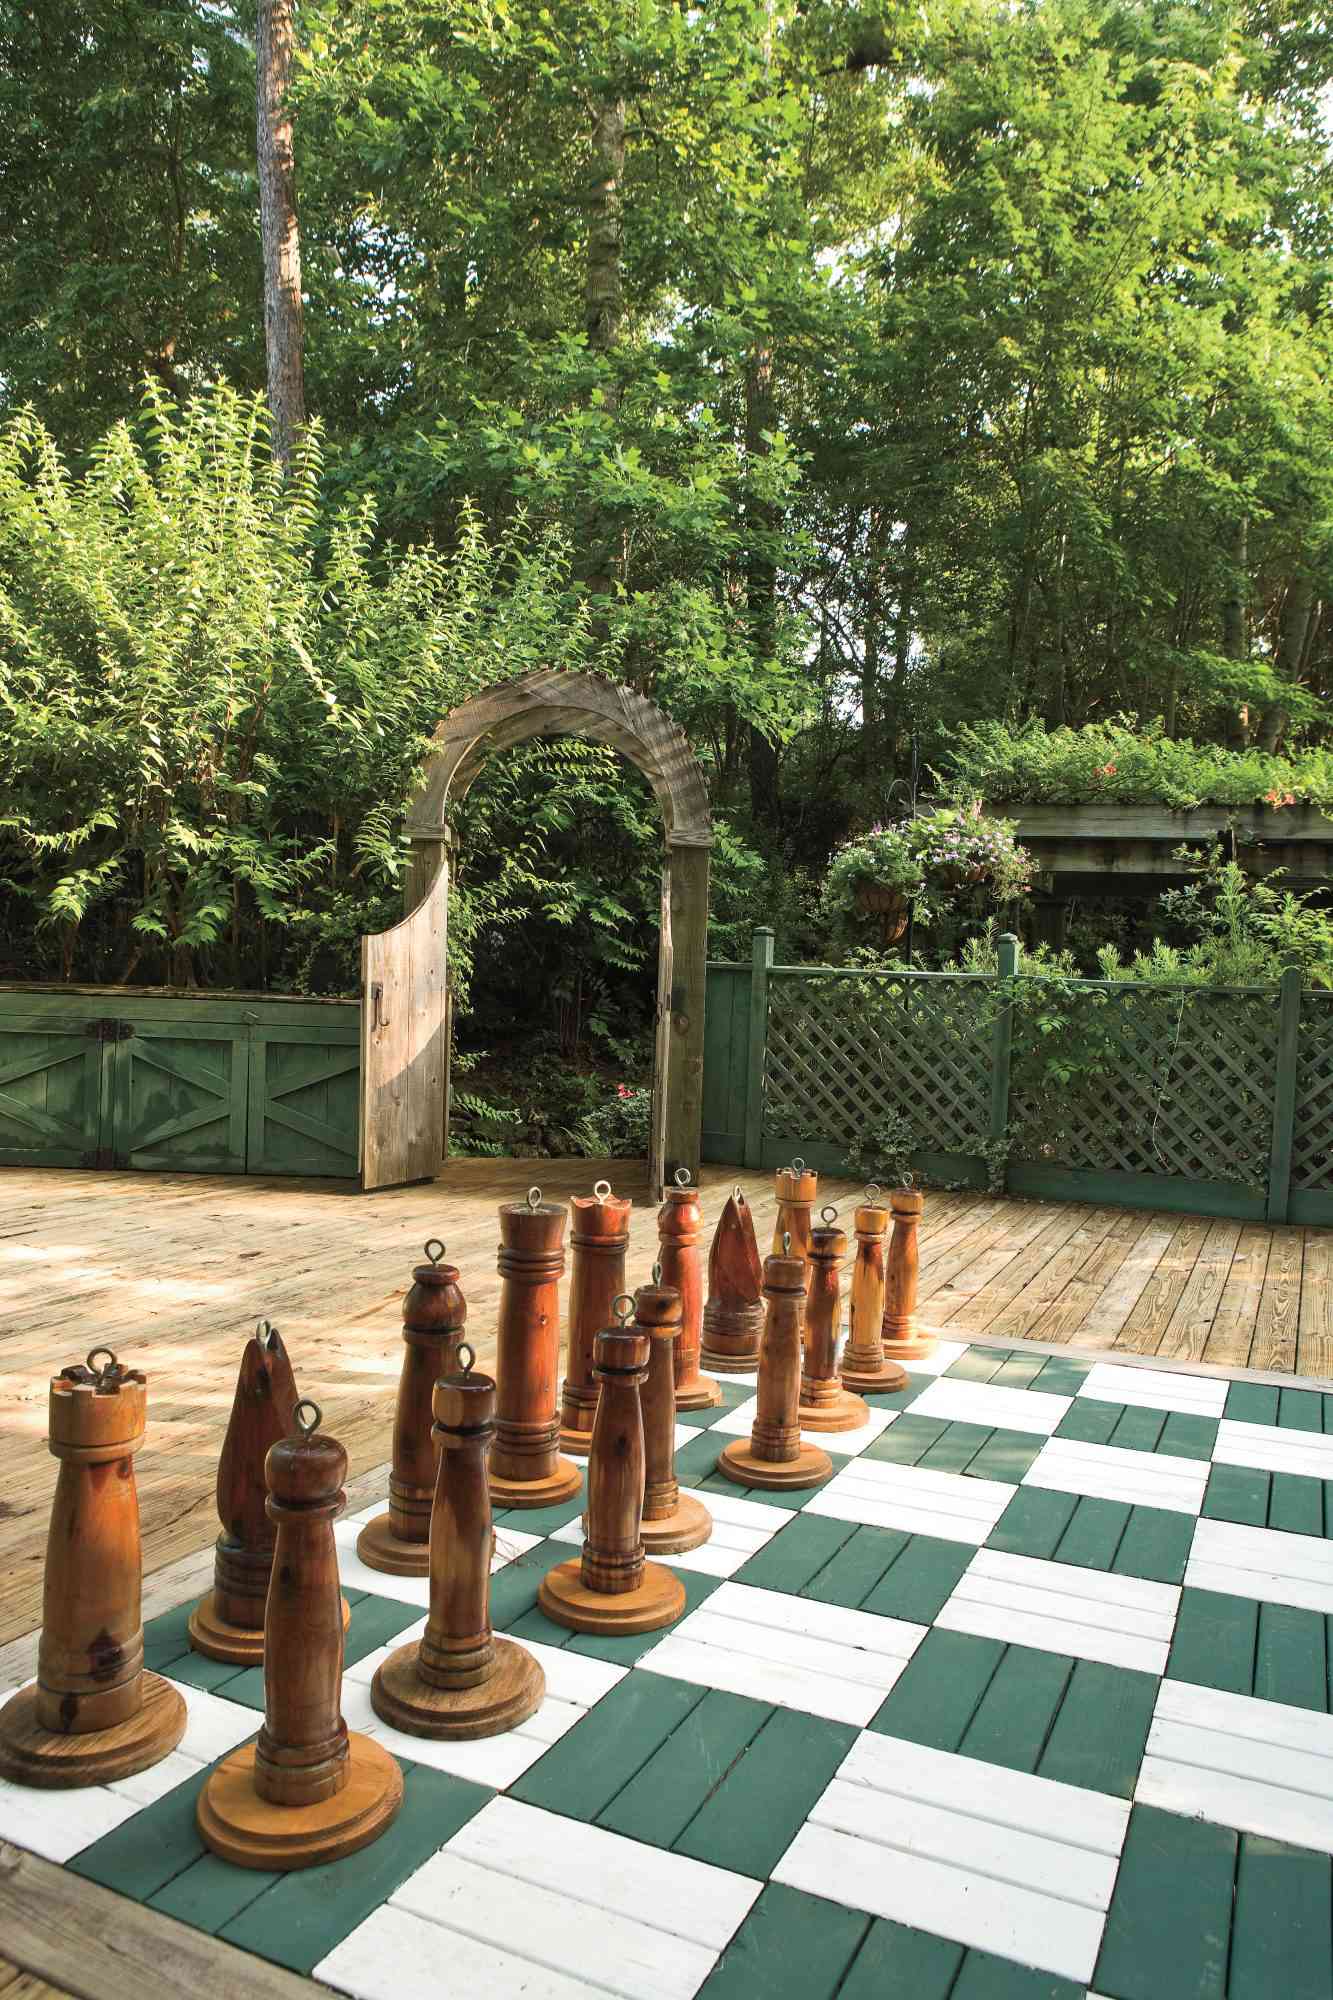 Life-Size Chess Board